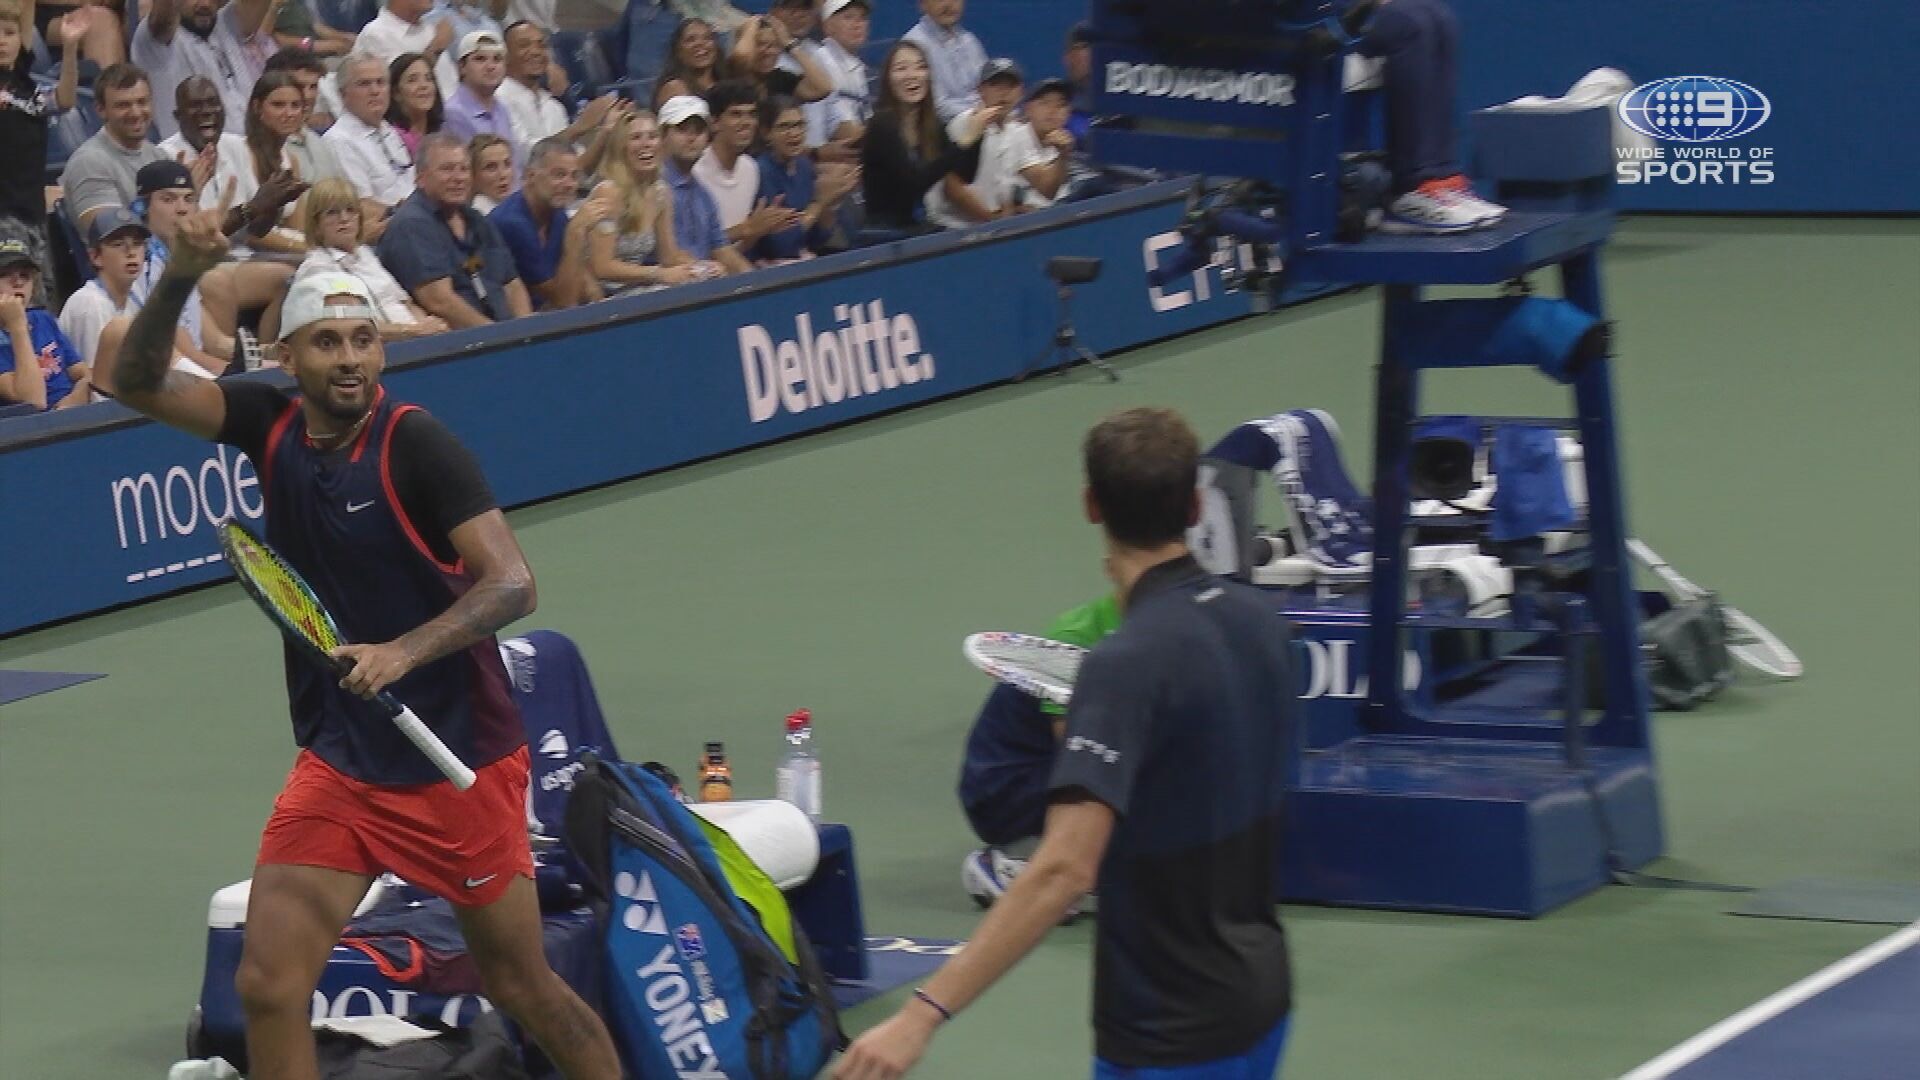 Nick Kyrgios penalised for 'foul shot' in 'crazy' US Open match against Daniil Medvedev